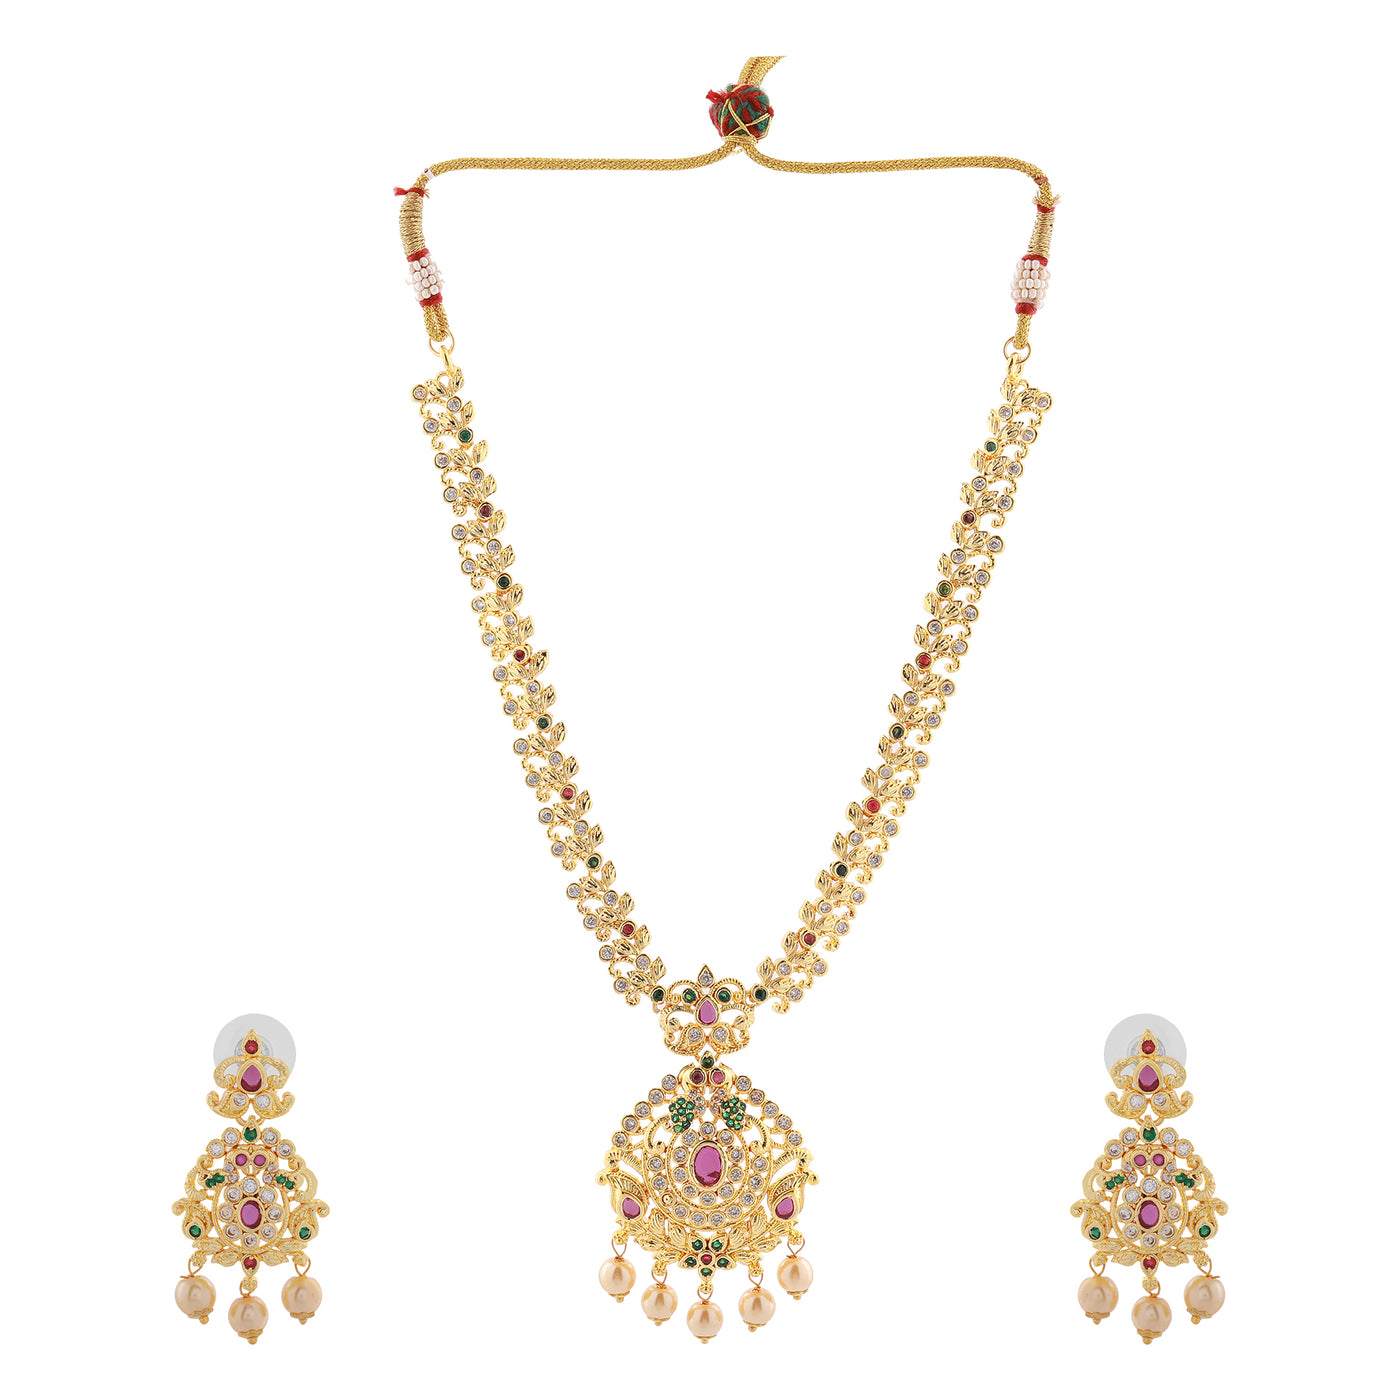 Estele Gold Plated CZ Ethnic Style Bridal Long Necklace set with Pearls & Colored Stones for Women